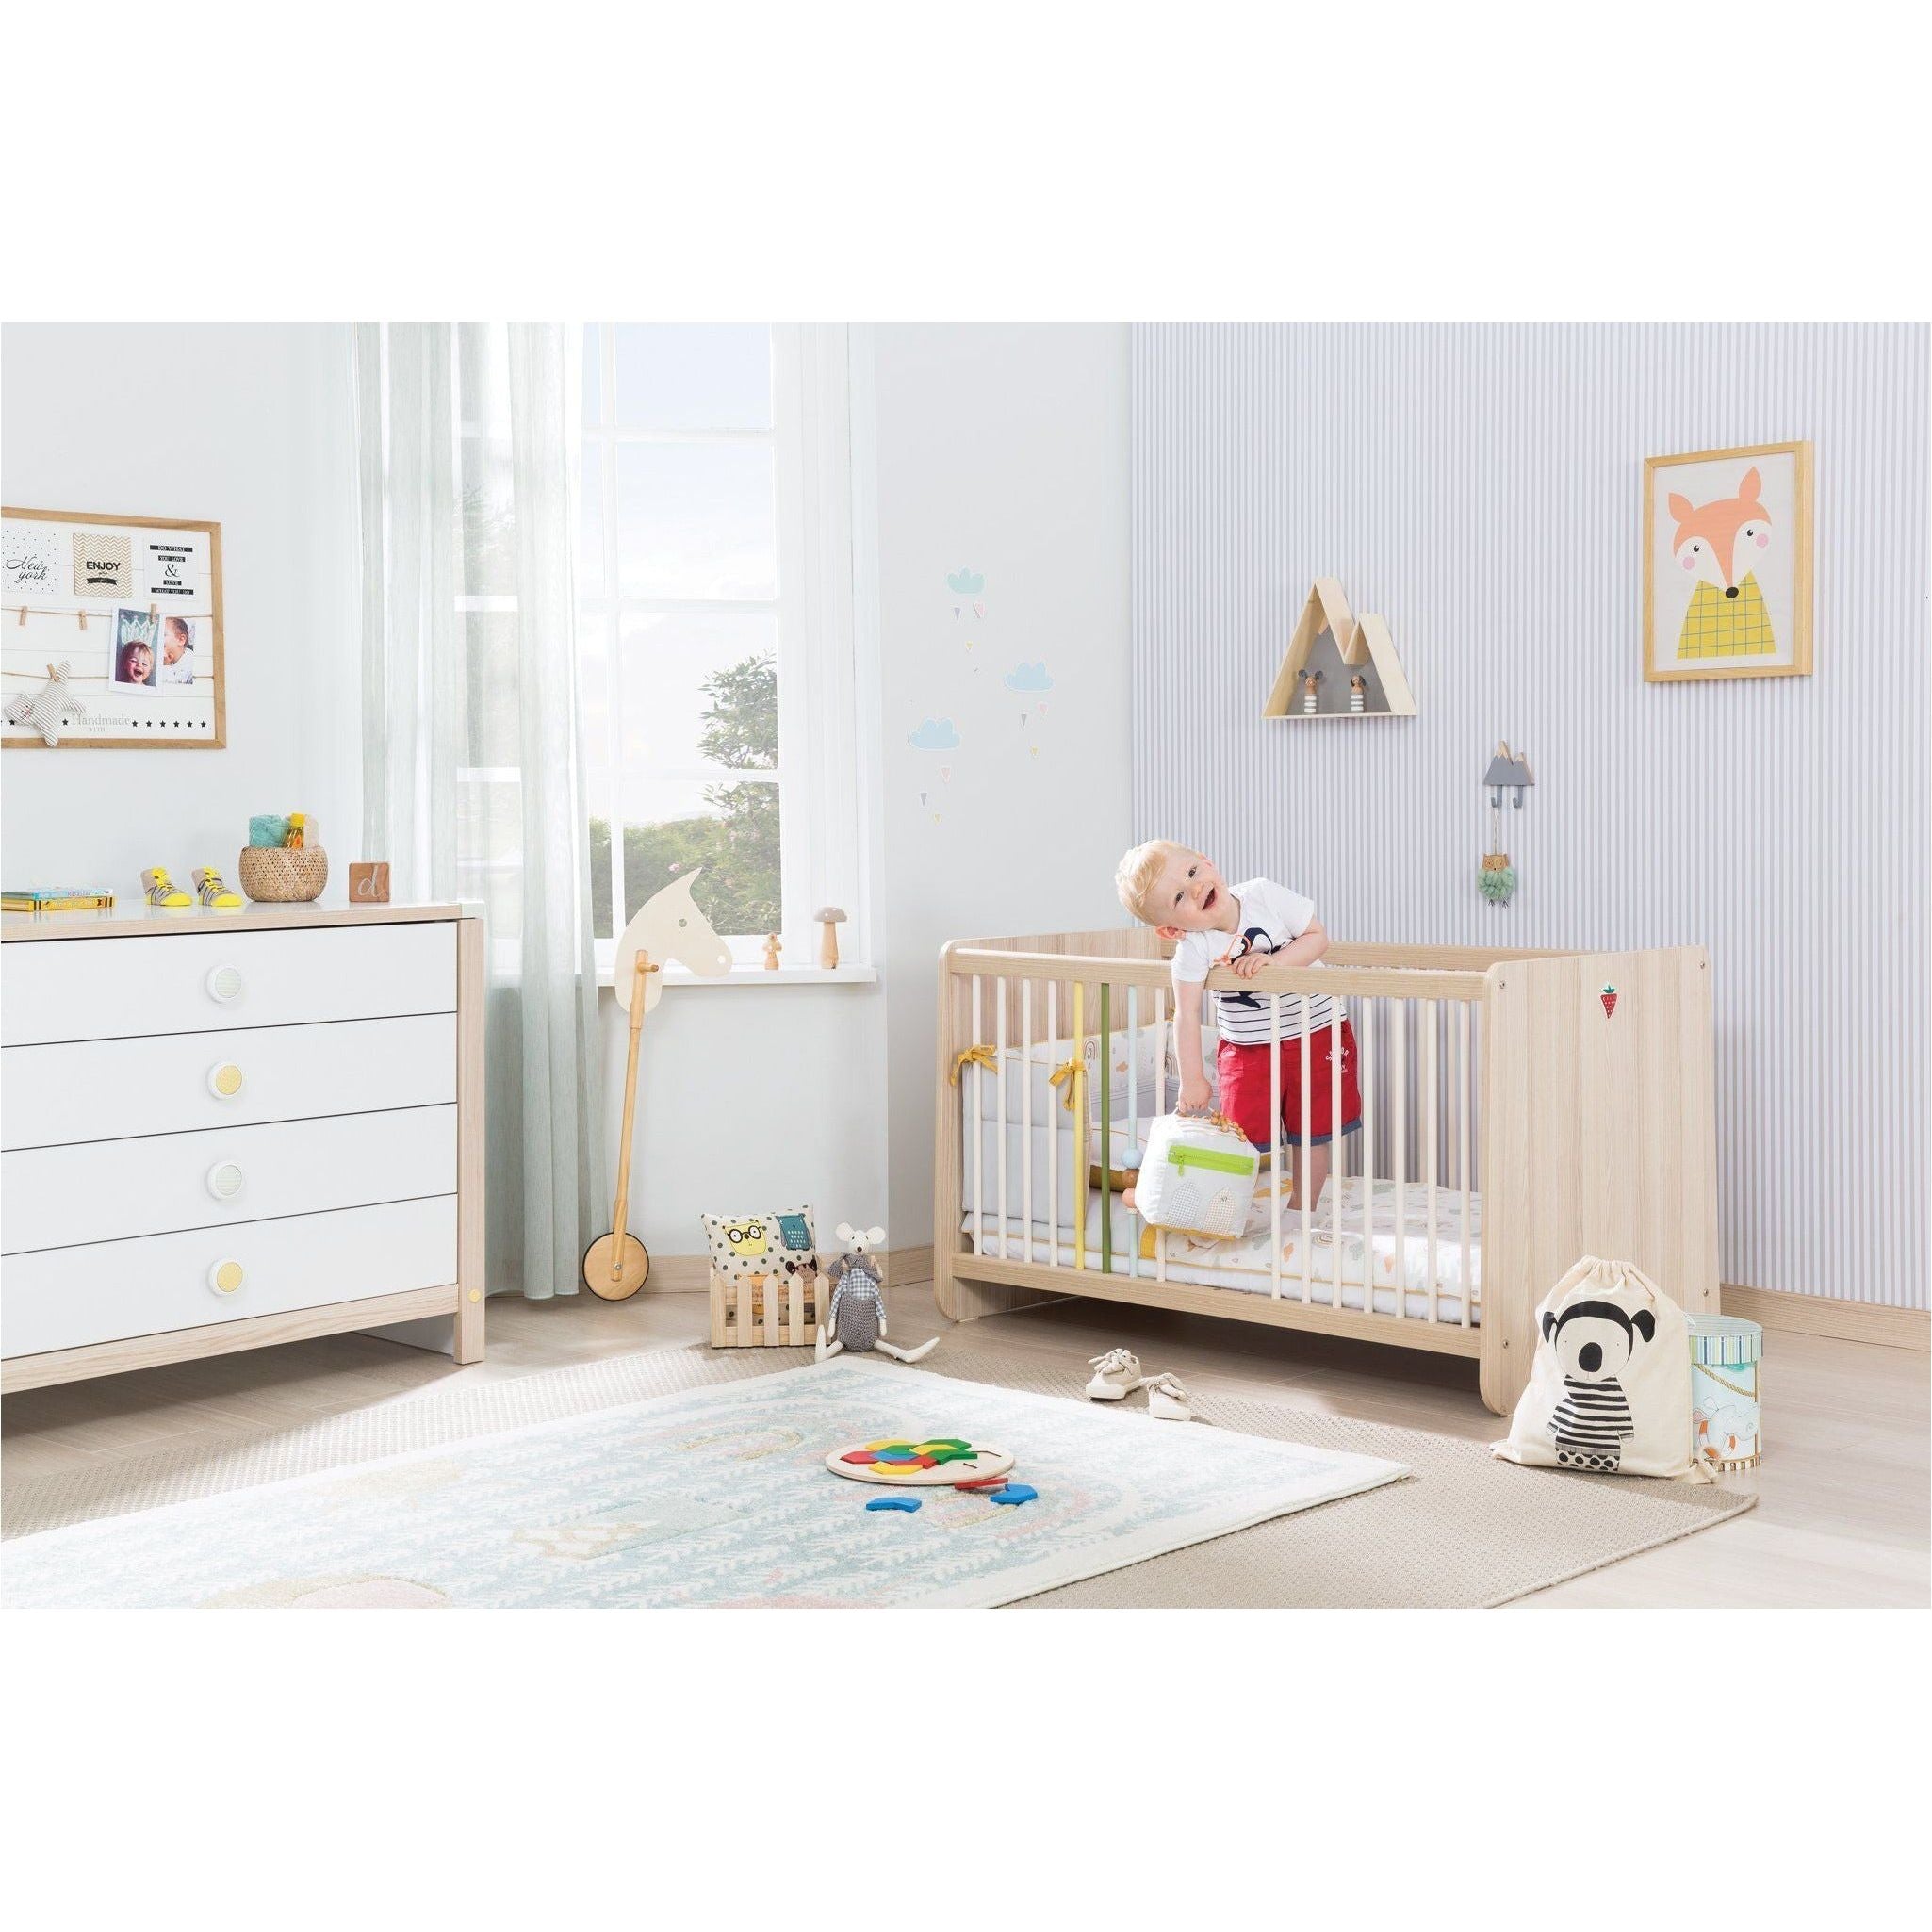 Montes Series 7 in 1 Baby Cot (Exclusive) - Full Set Include Bedding Set & Mattress | Little Baby.